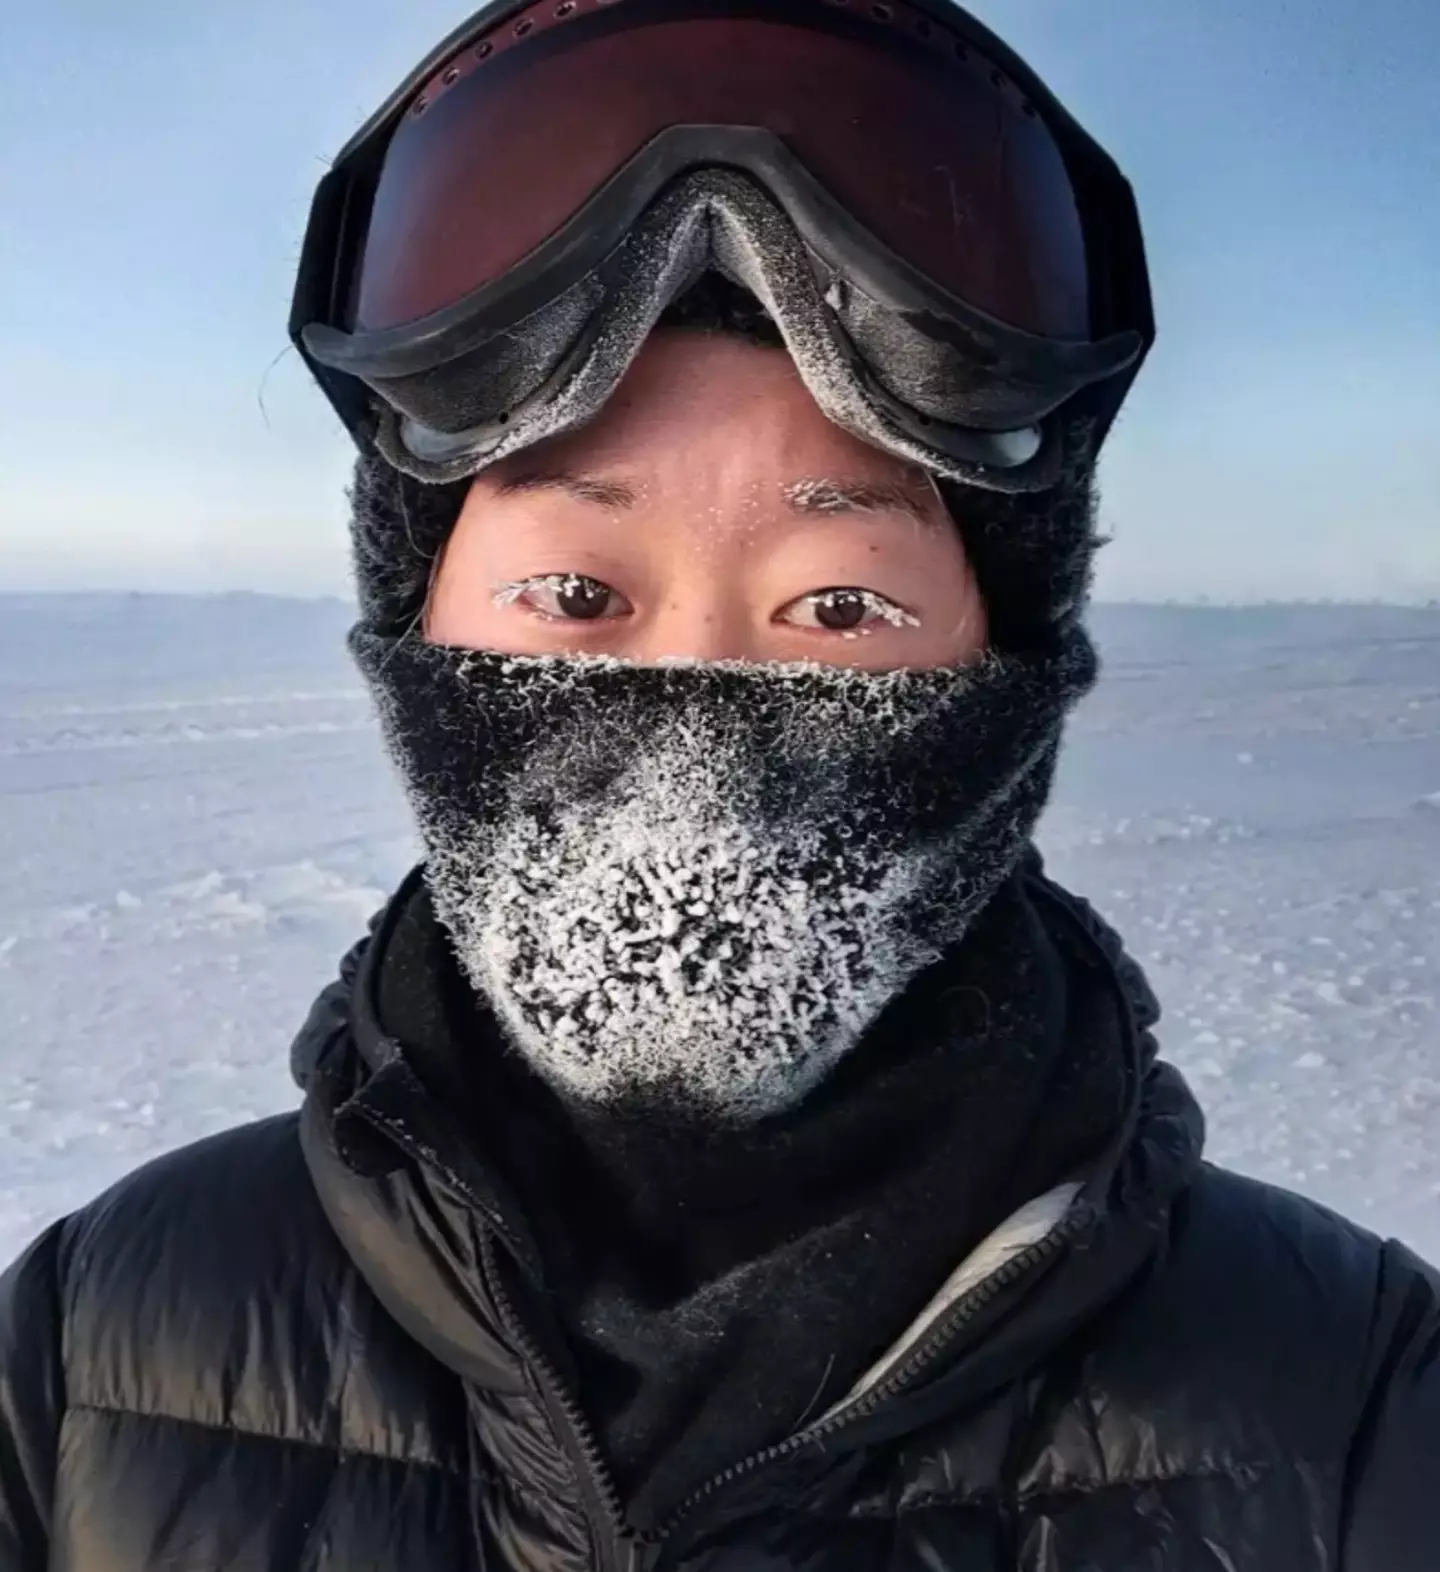 Michelle Endo spent a year working at the South Pole.